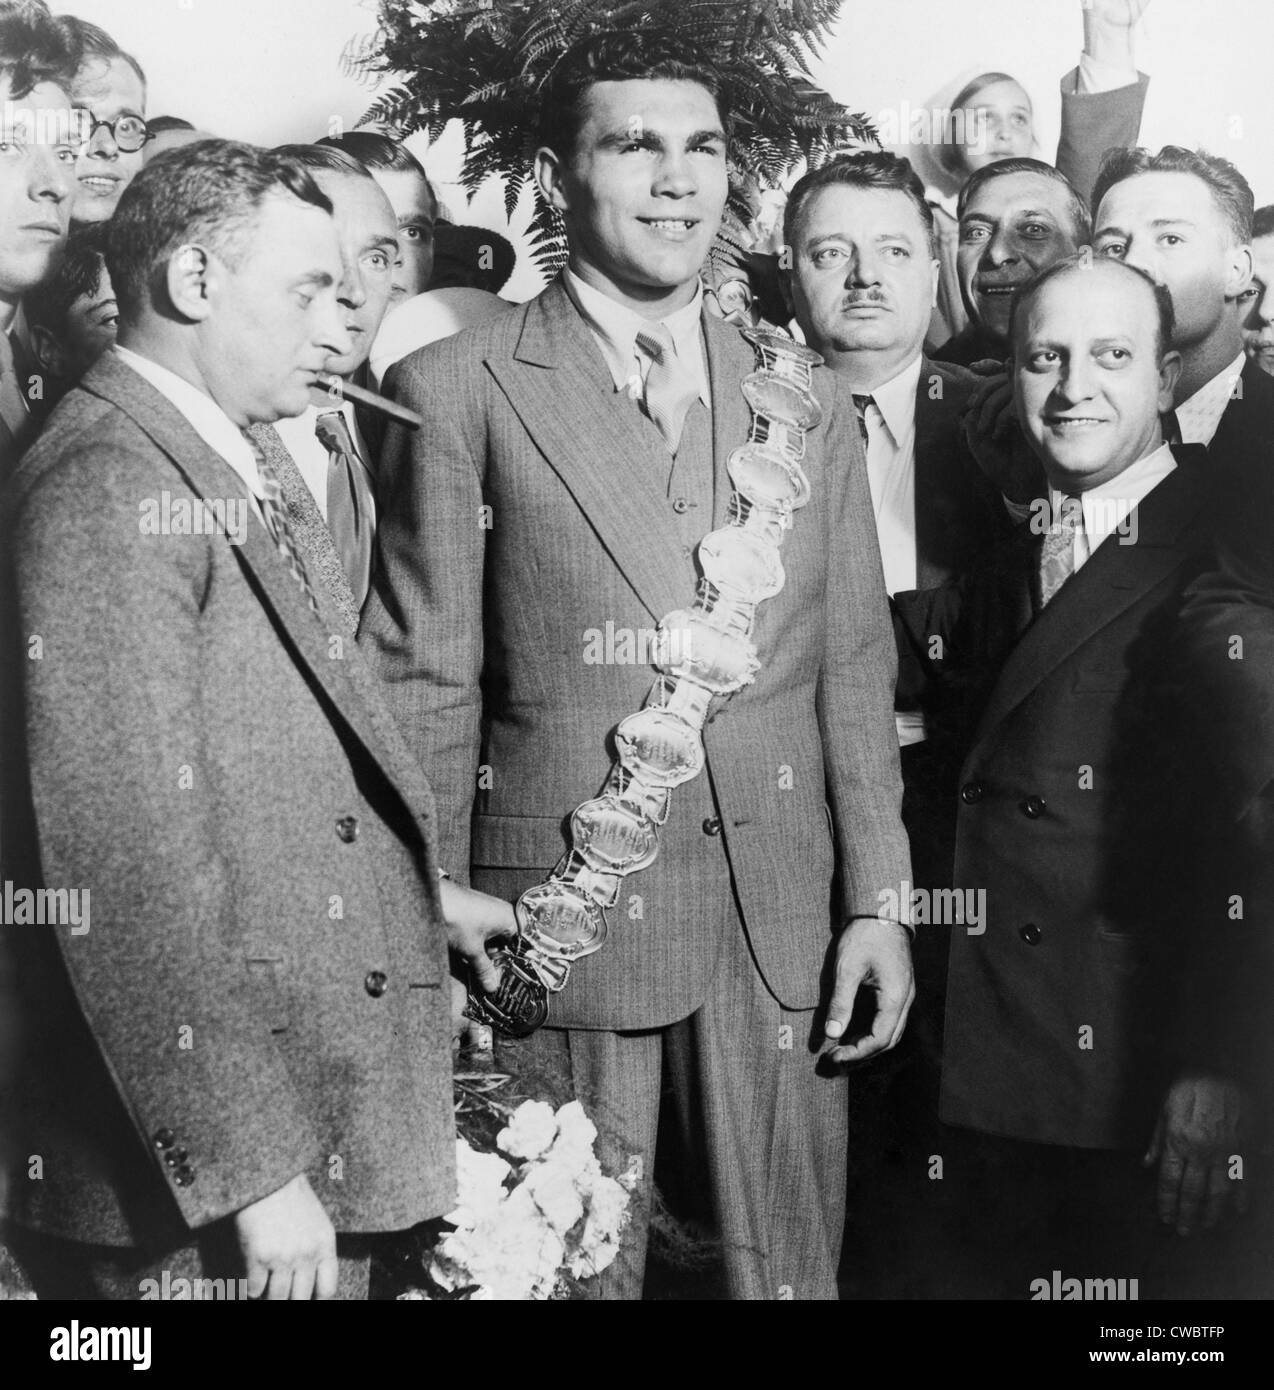 Image result for max schmeling and Joe Jacobs